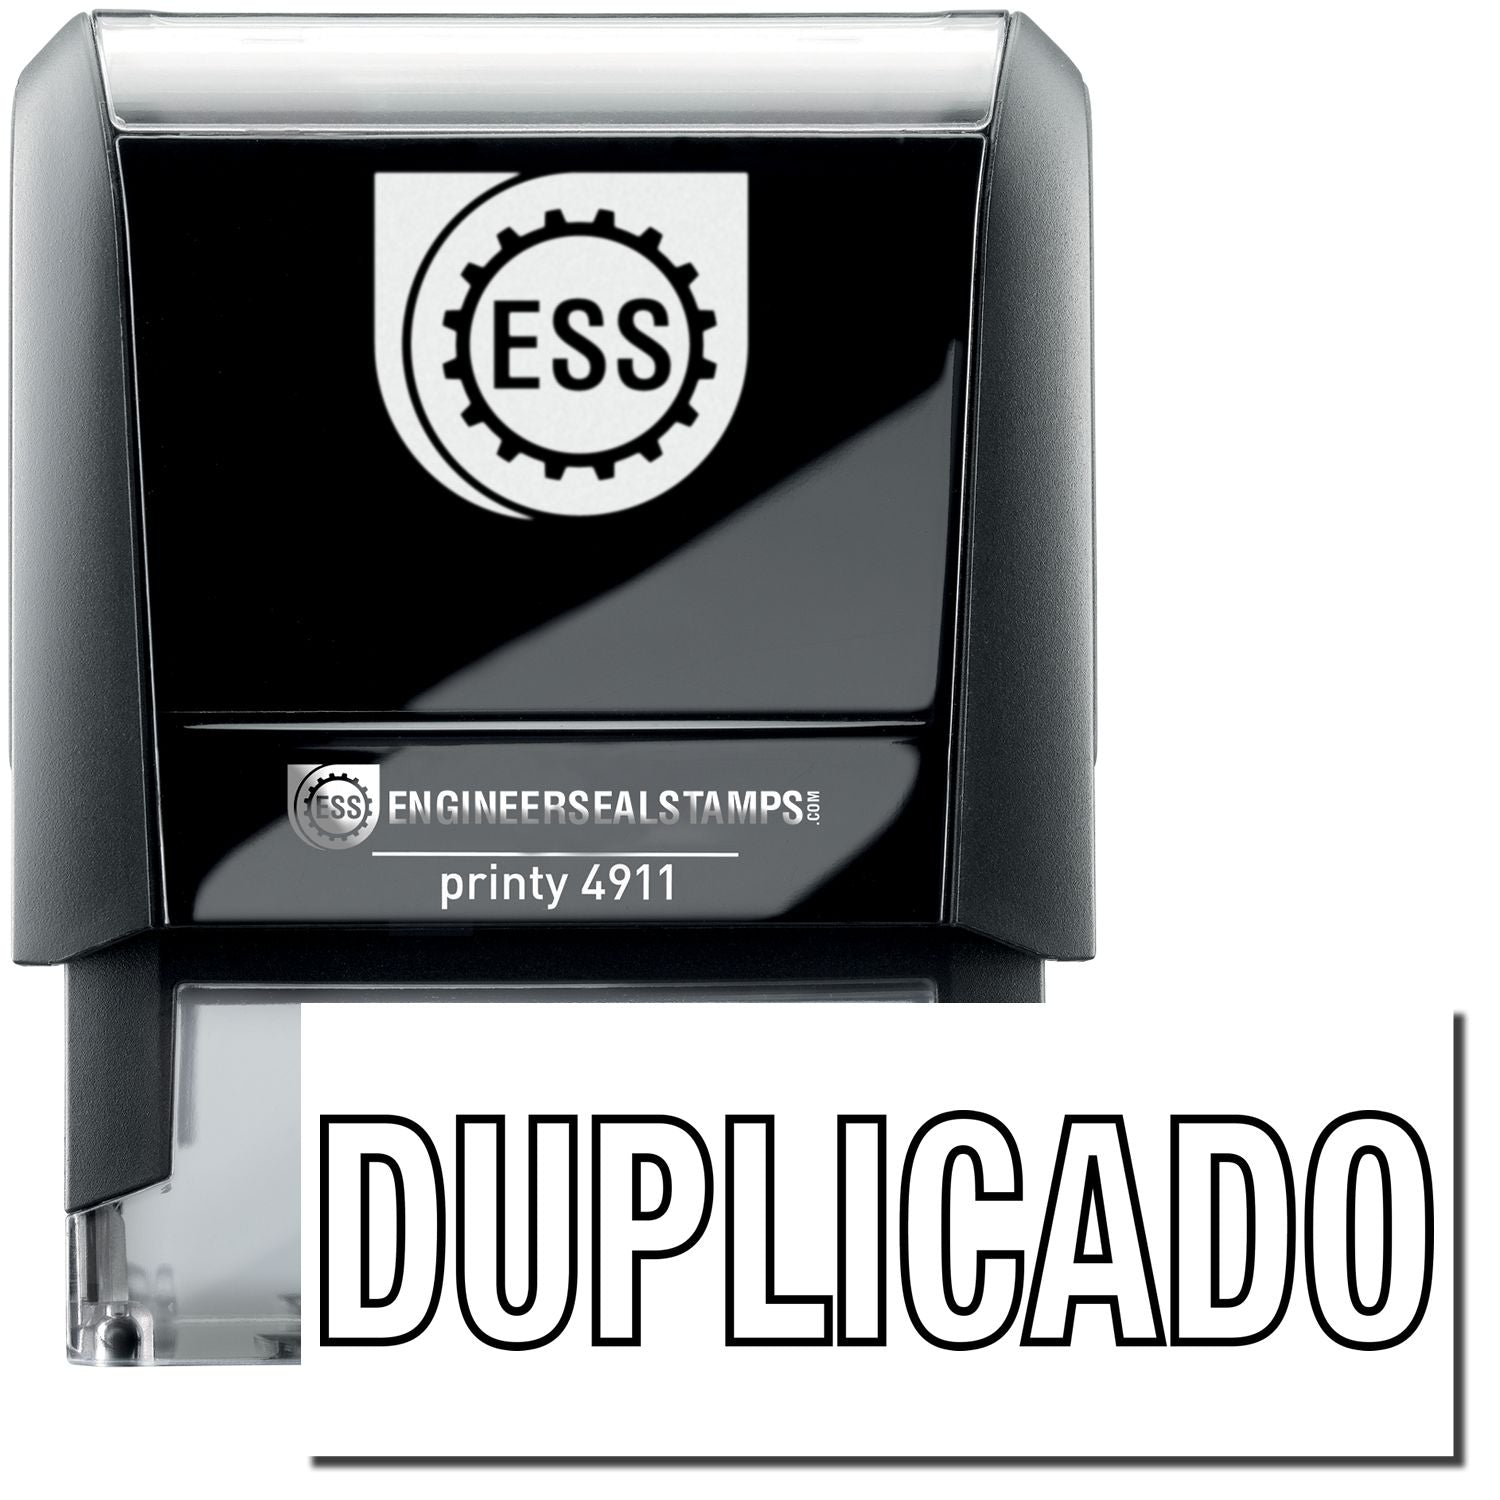 A self-inking stamp with a stamped image showing how the text "DUPLICADO" in an outline style is displayed after stamping.